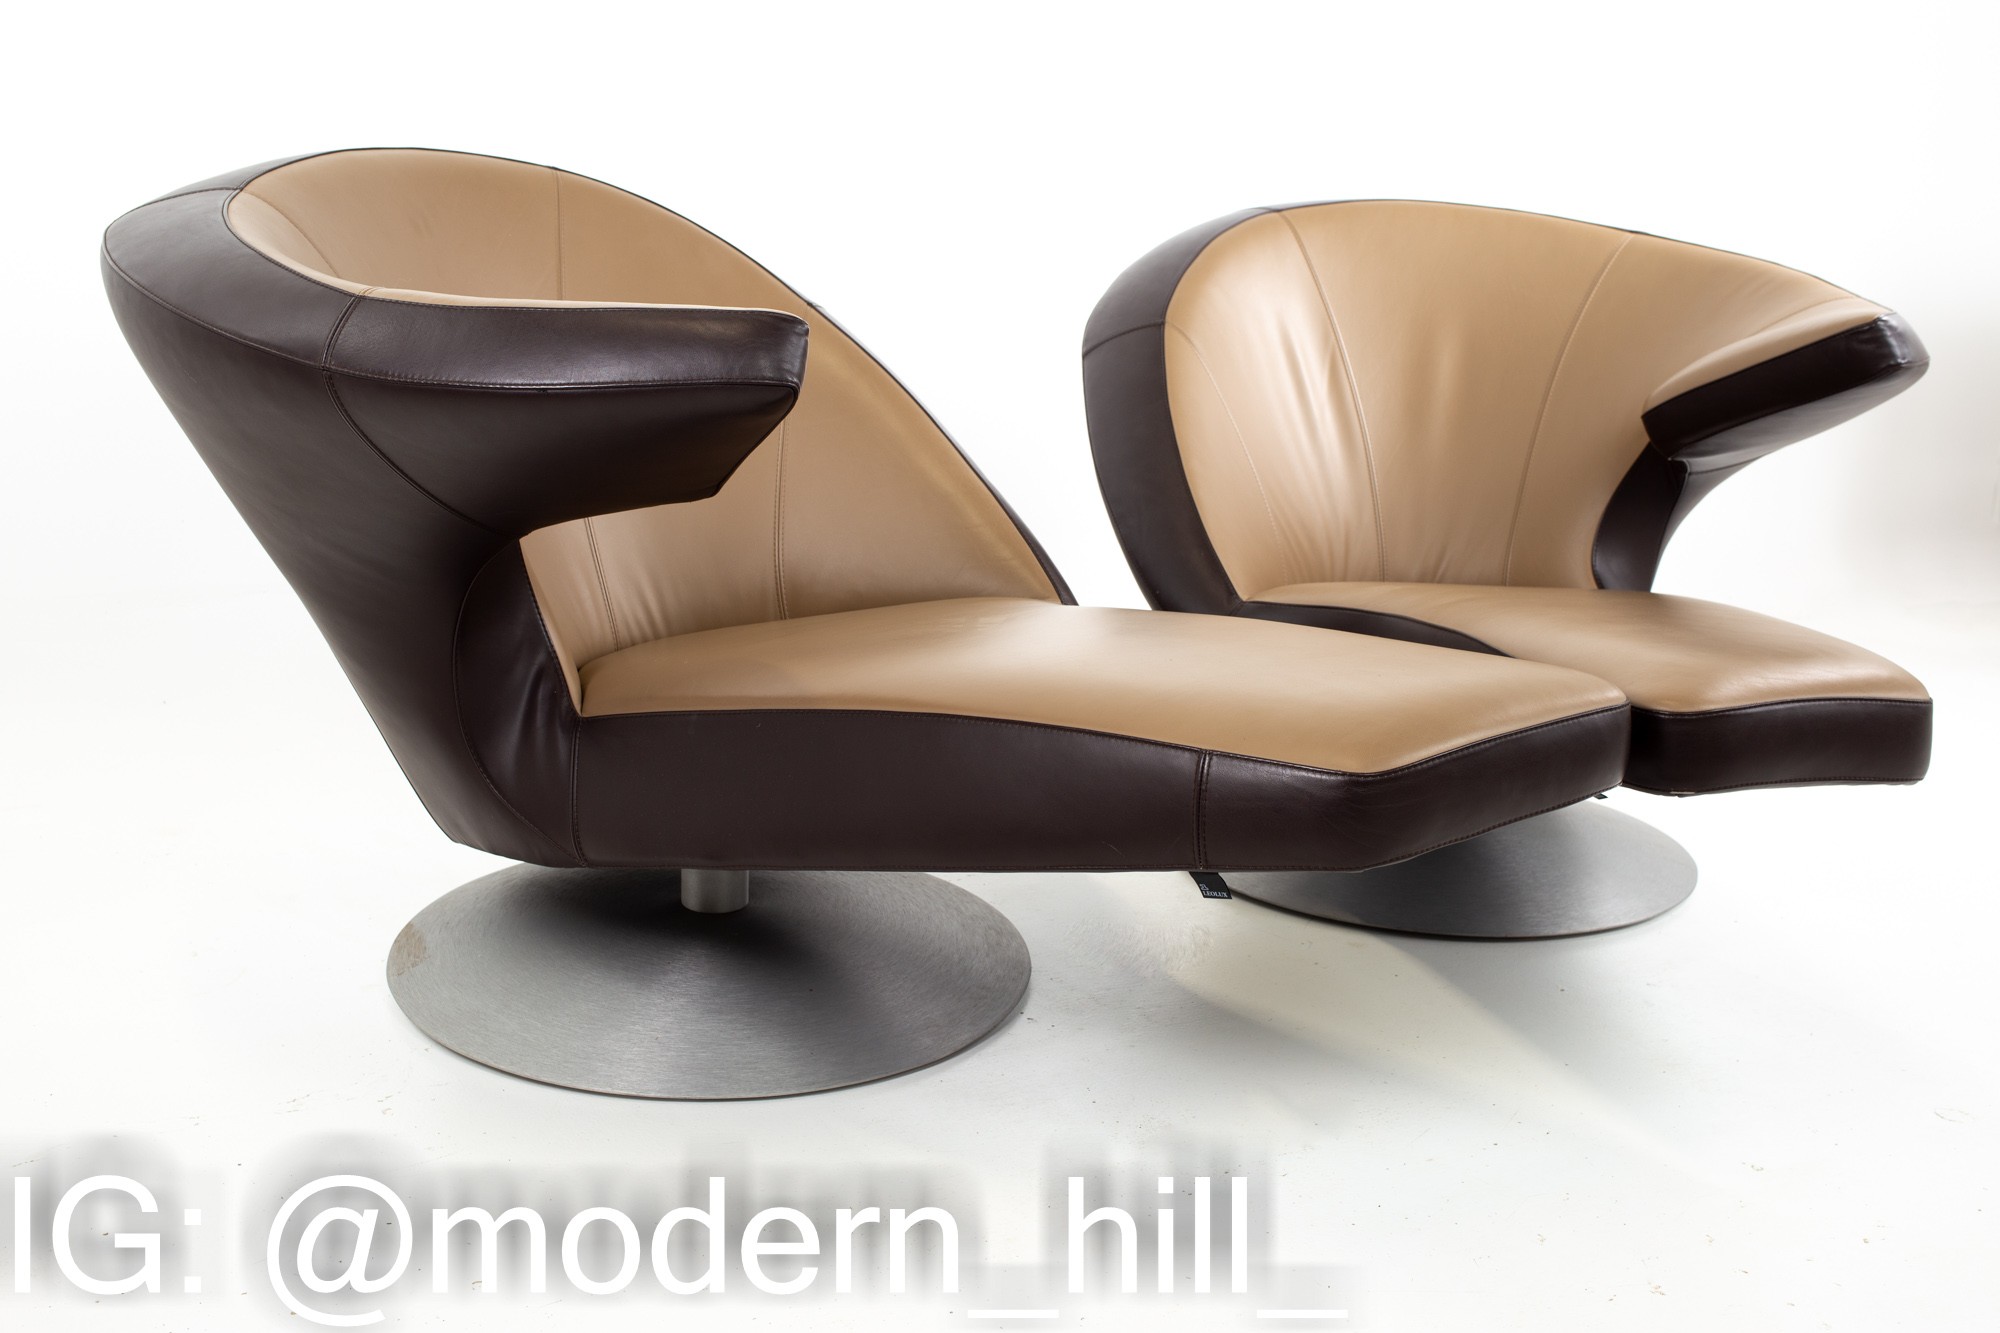 Leolux Leather Swivel Chaise Lounge Chairs - Pair